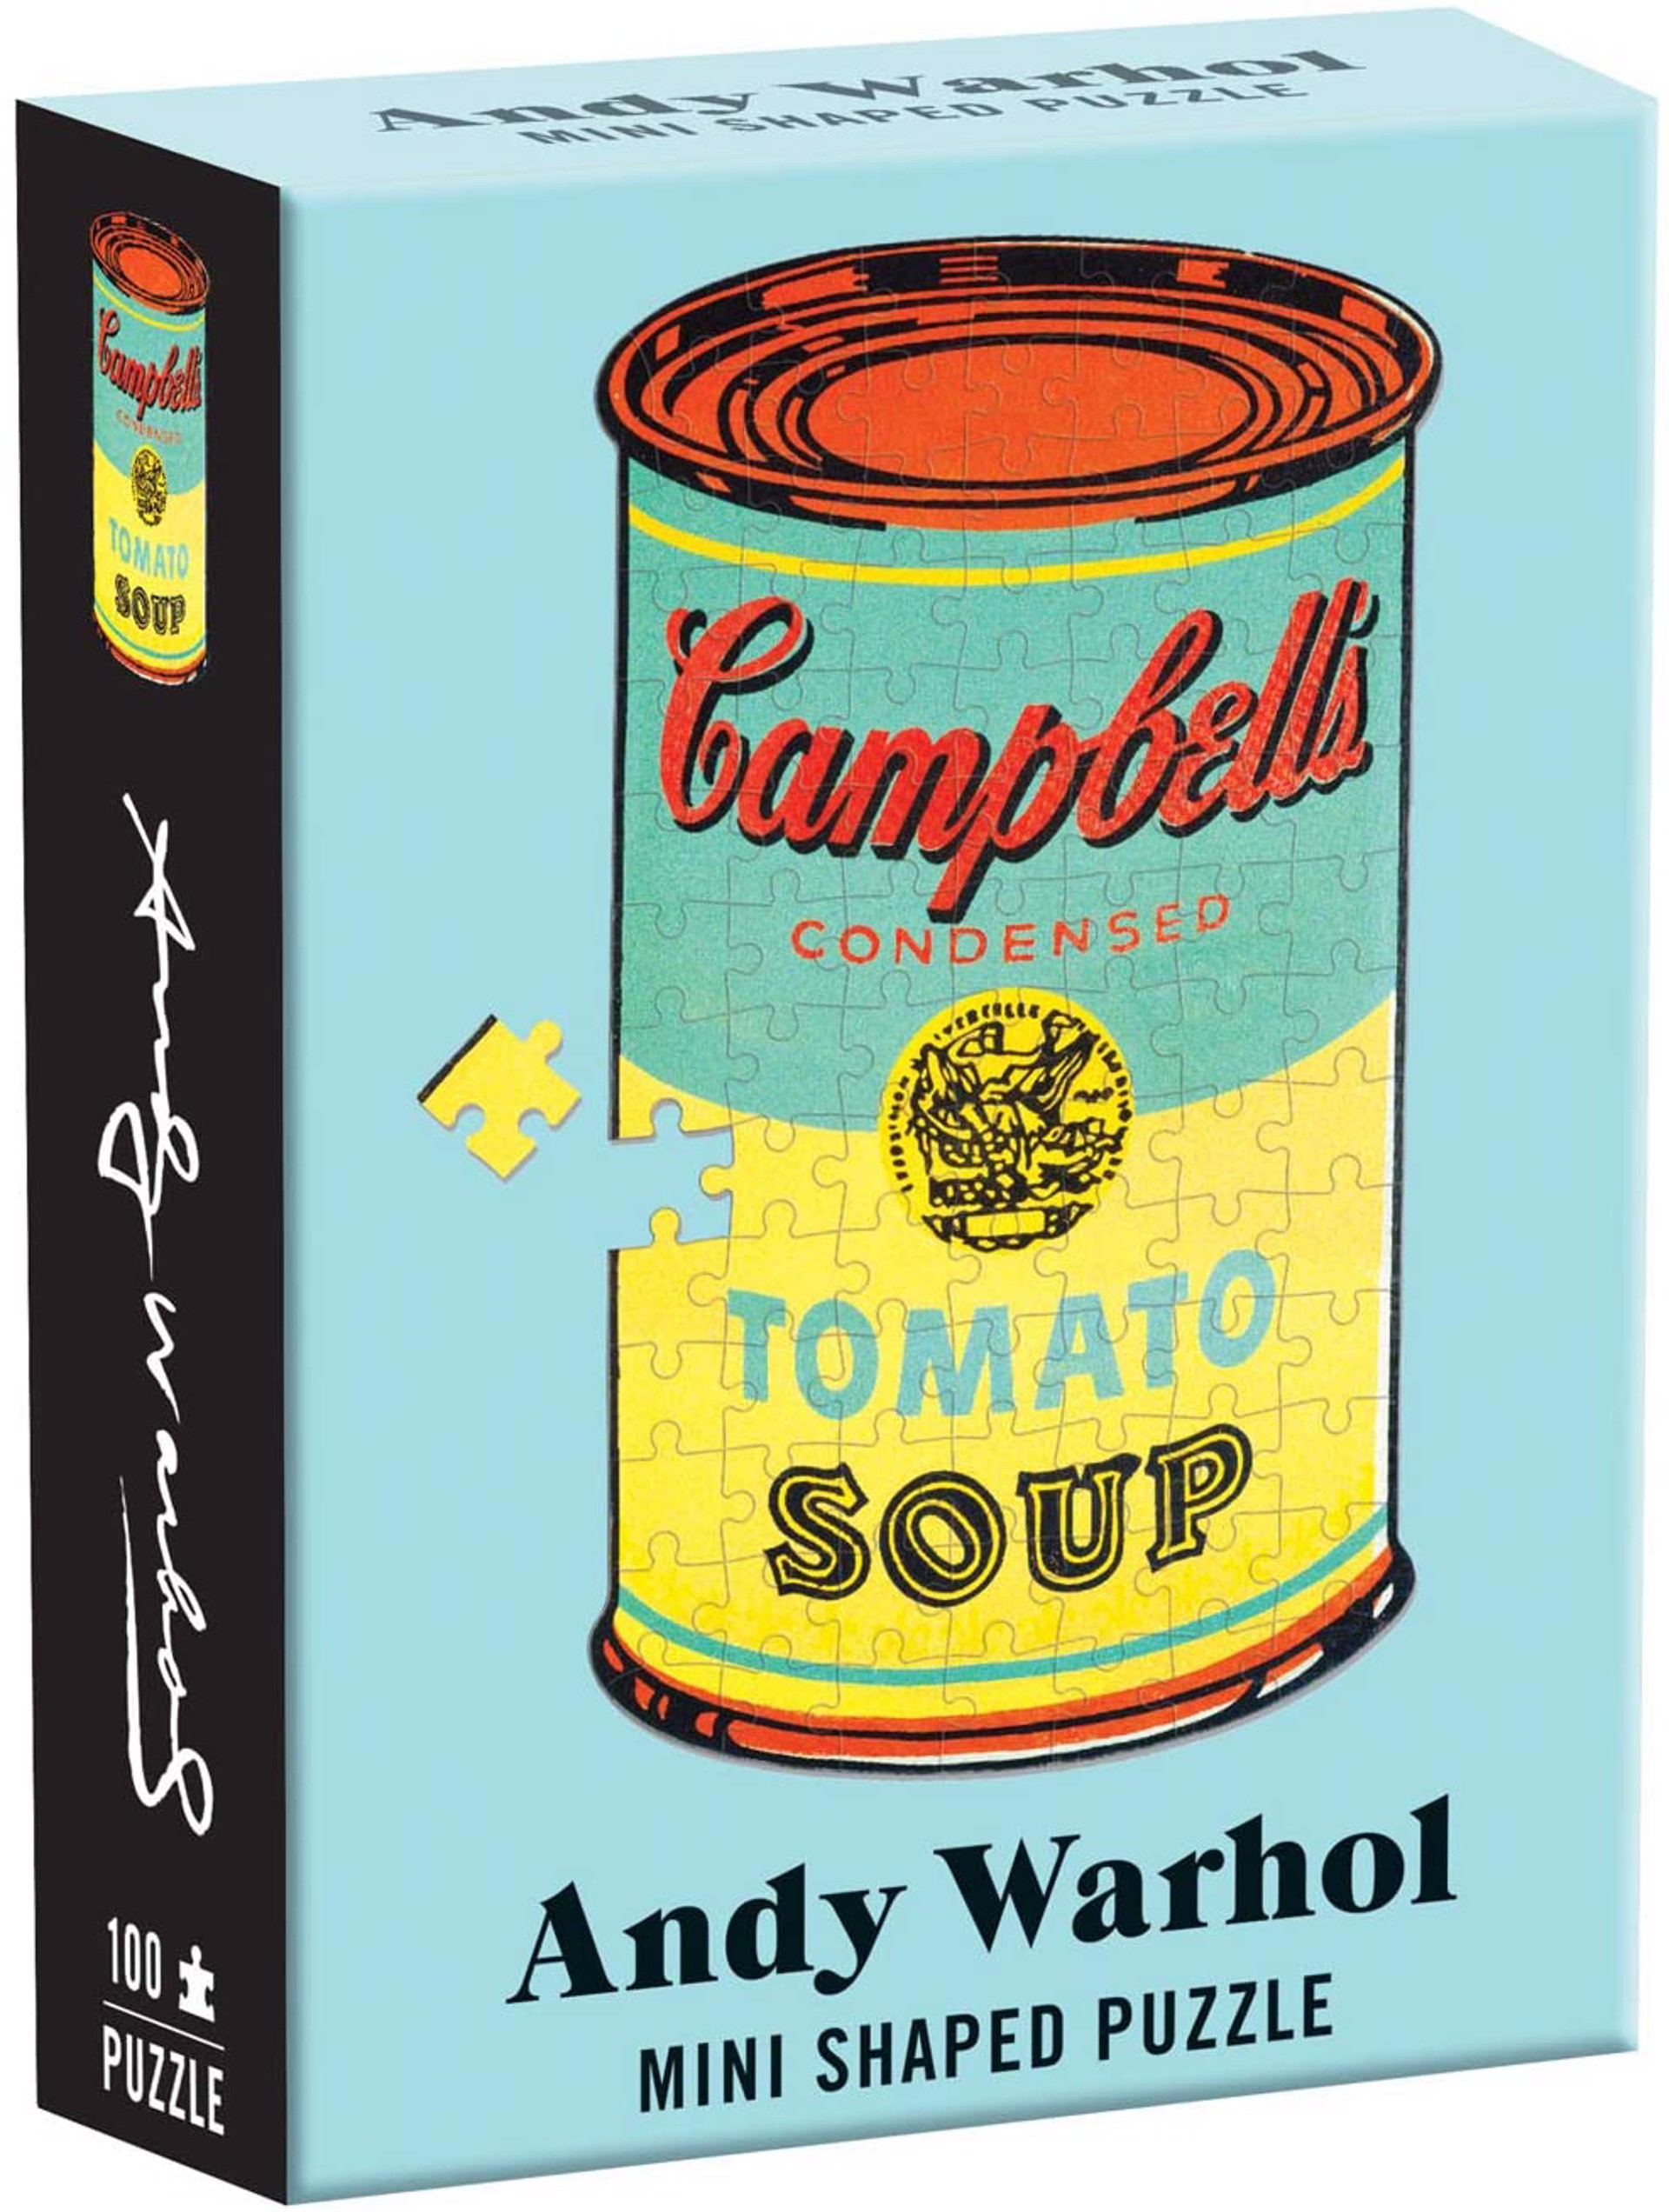 Mini Shaped Puzzle Campbell's Soup Can by Andy Warhol